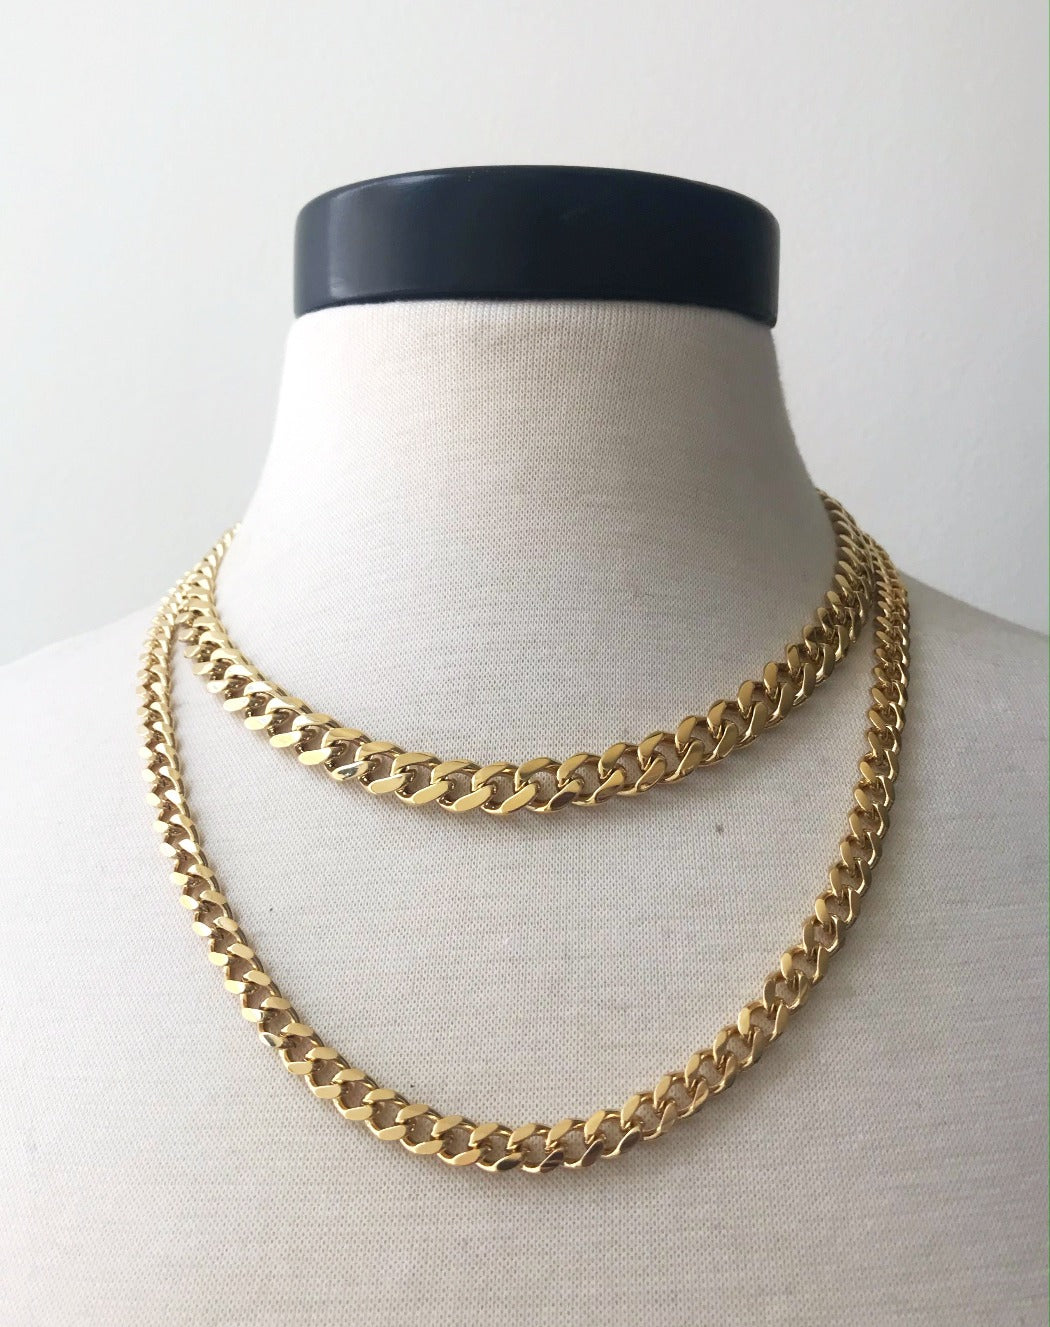 Rachel Mulherin basic gold layered curb chain necklaces on neck 18"